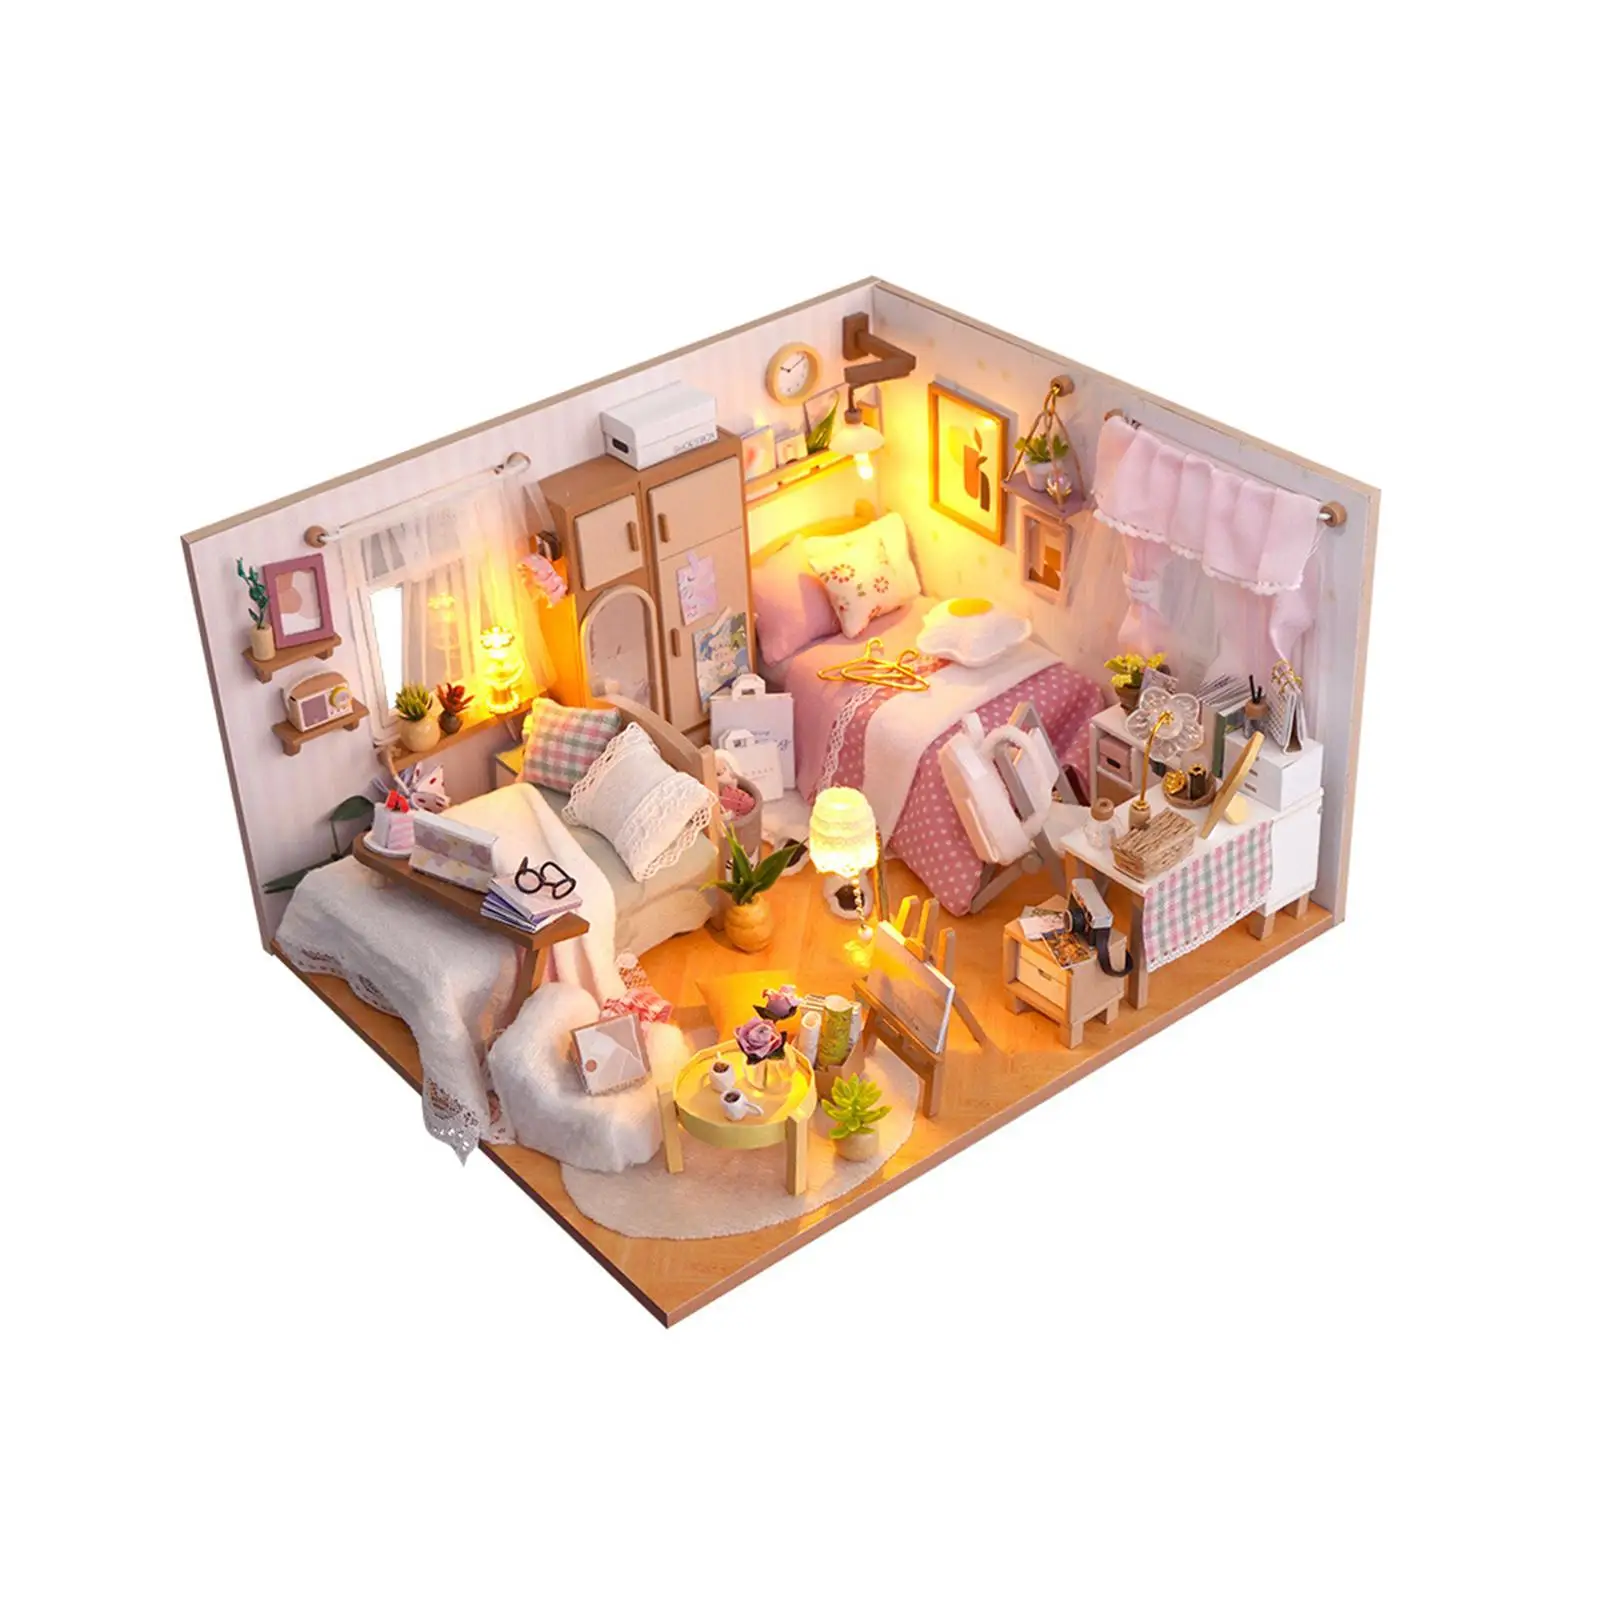 DIY Wooden Miniature Dollhouse Kits Birthday Gifts Collectibles with Furniture and Ornaments Educational Toy Creative Bedroom